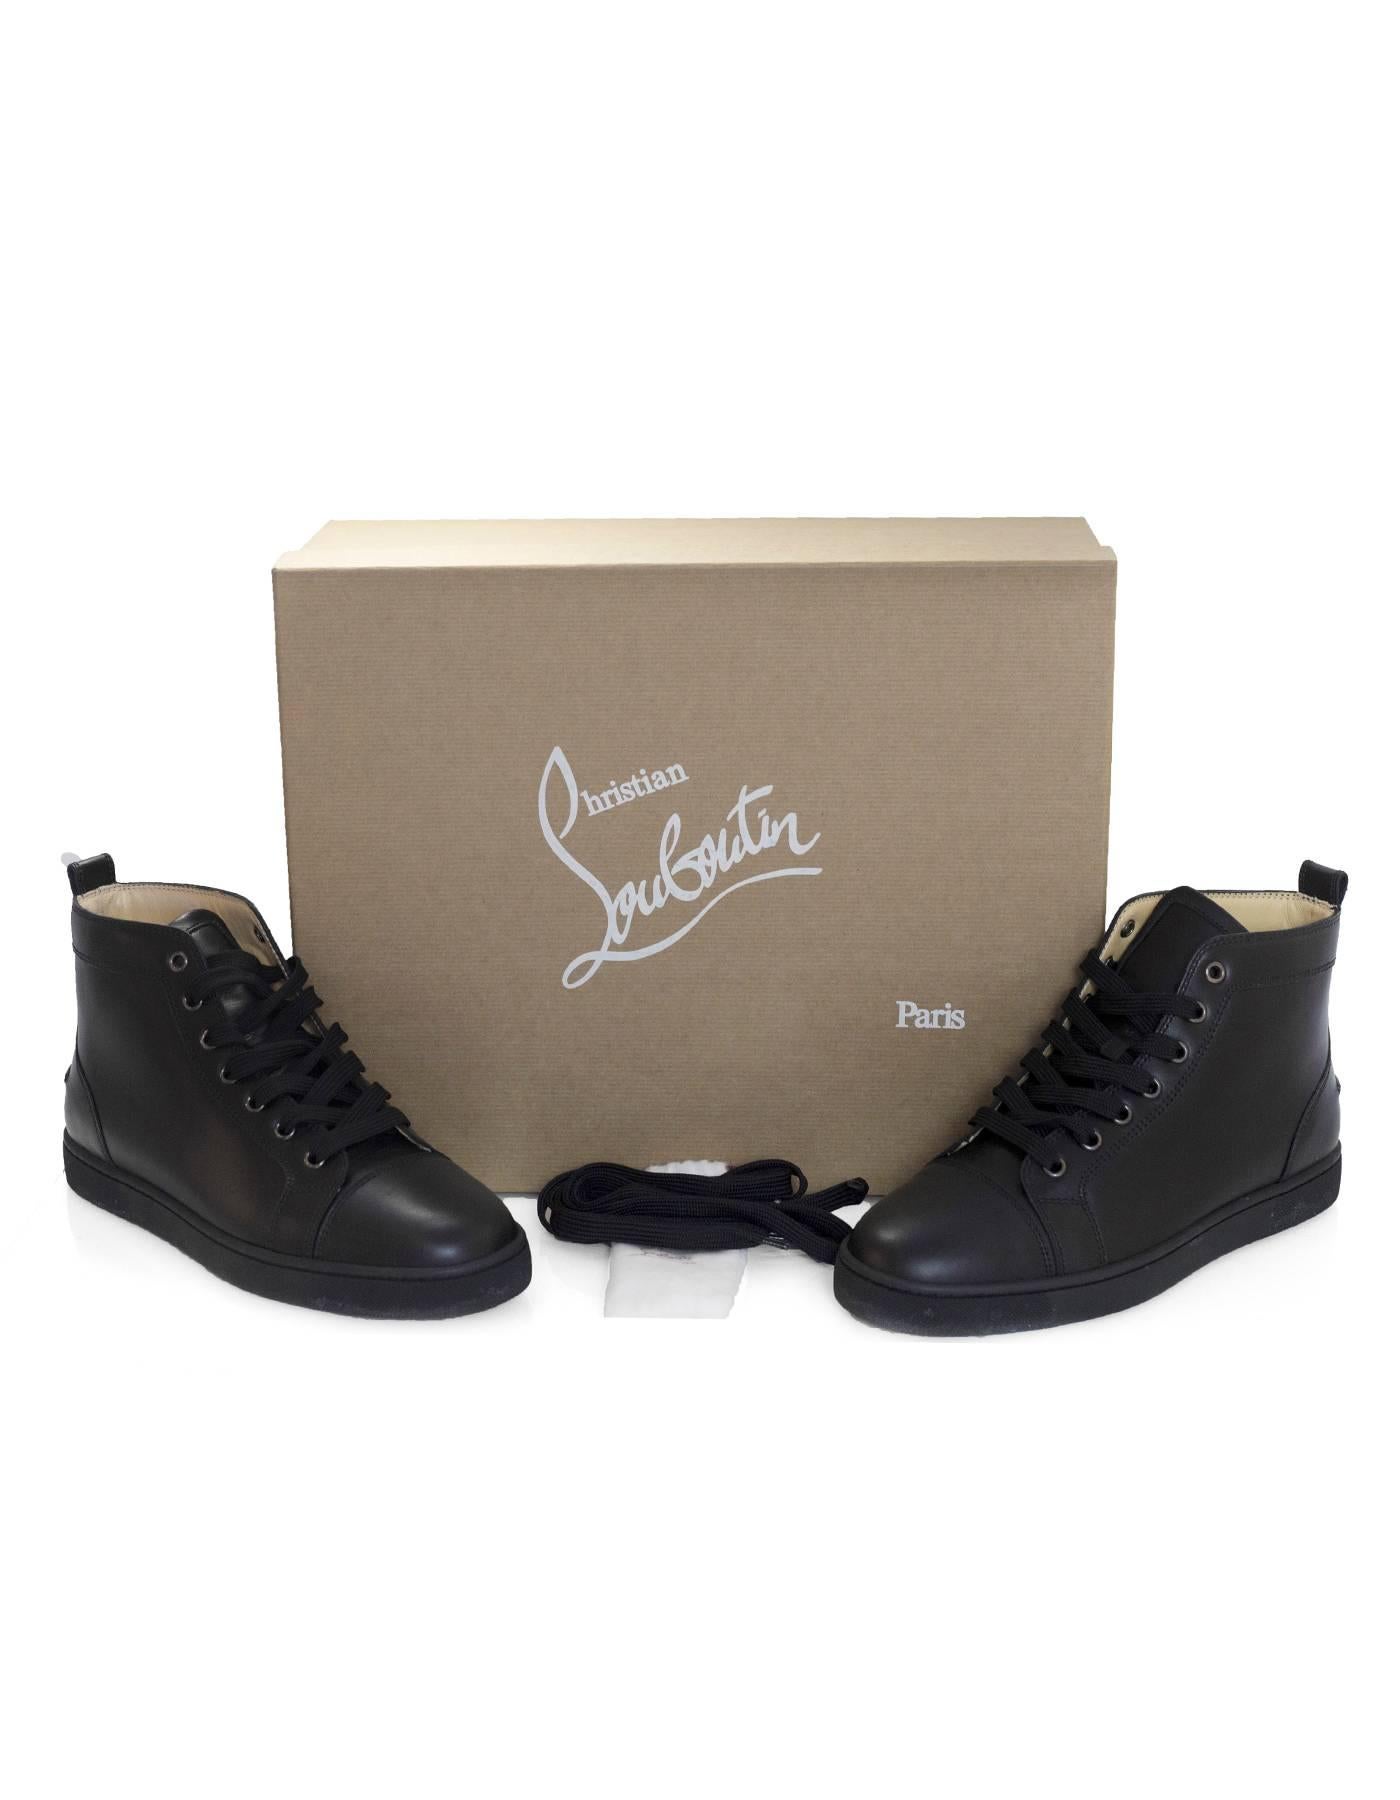 Christian Louboutin Mens Black Leather Louis Sneakers Sz 40 with Box 2